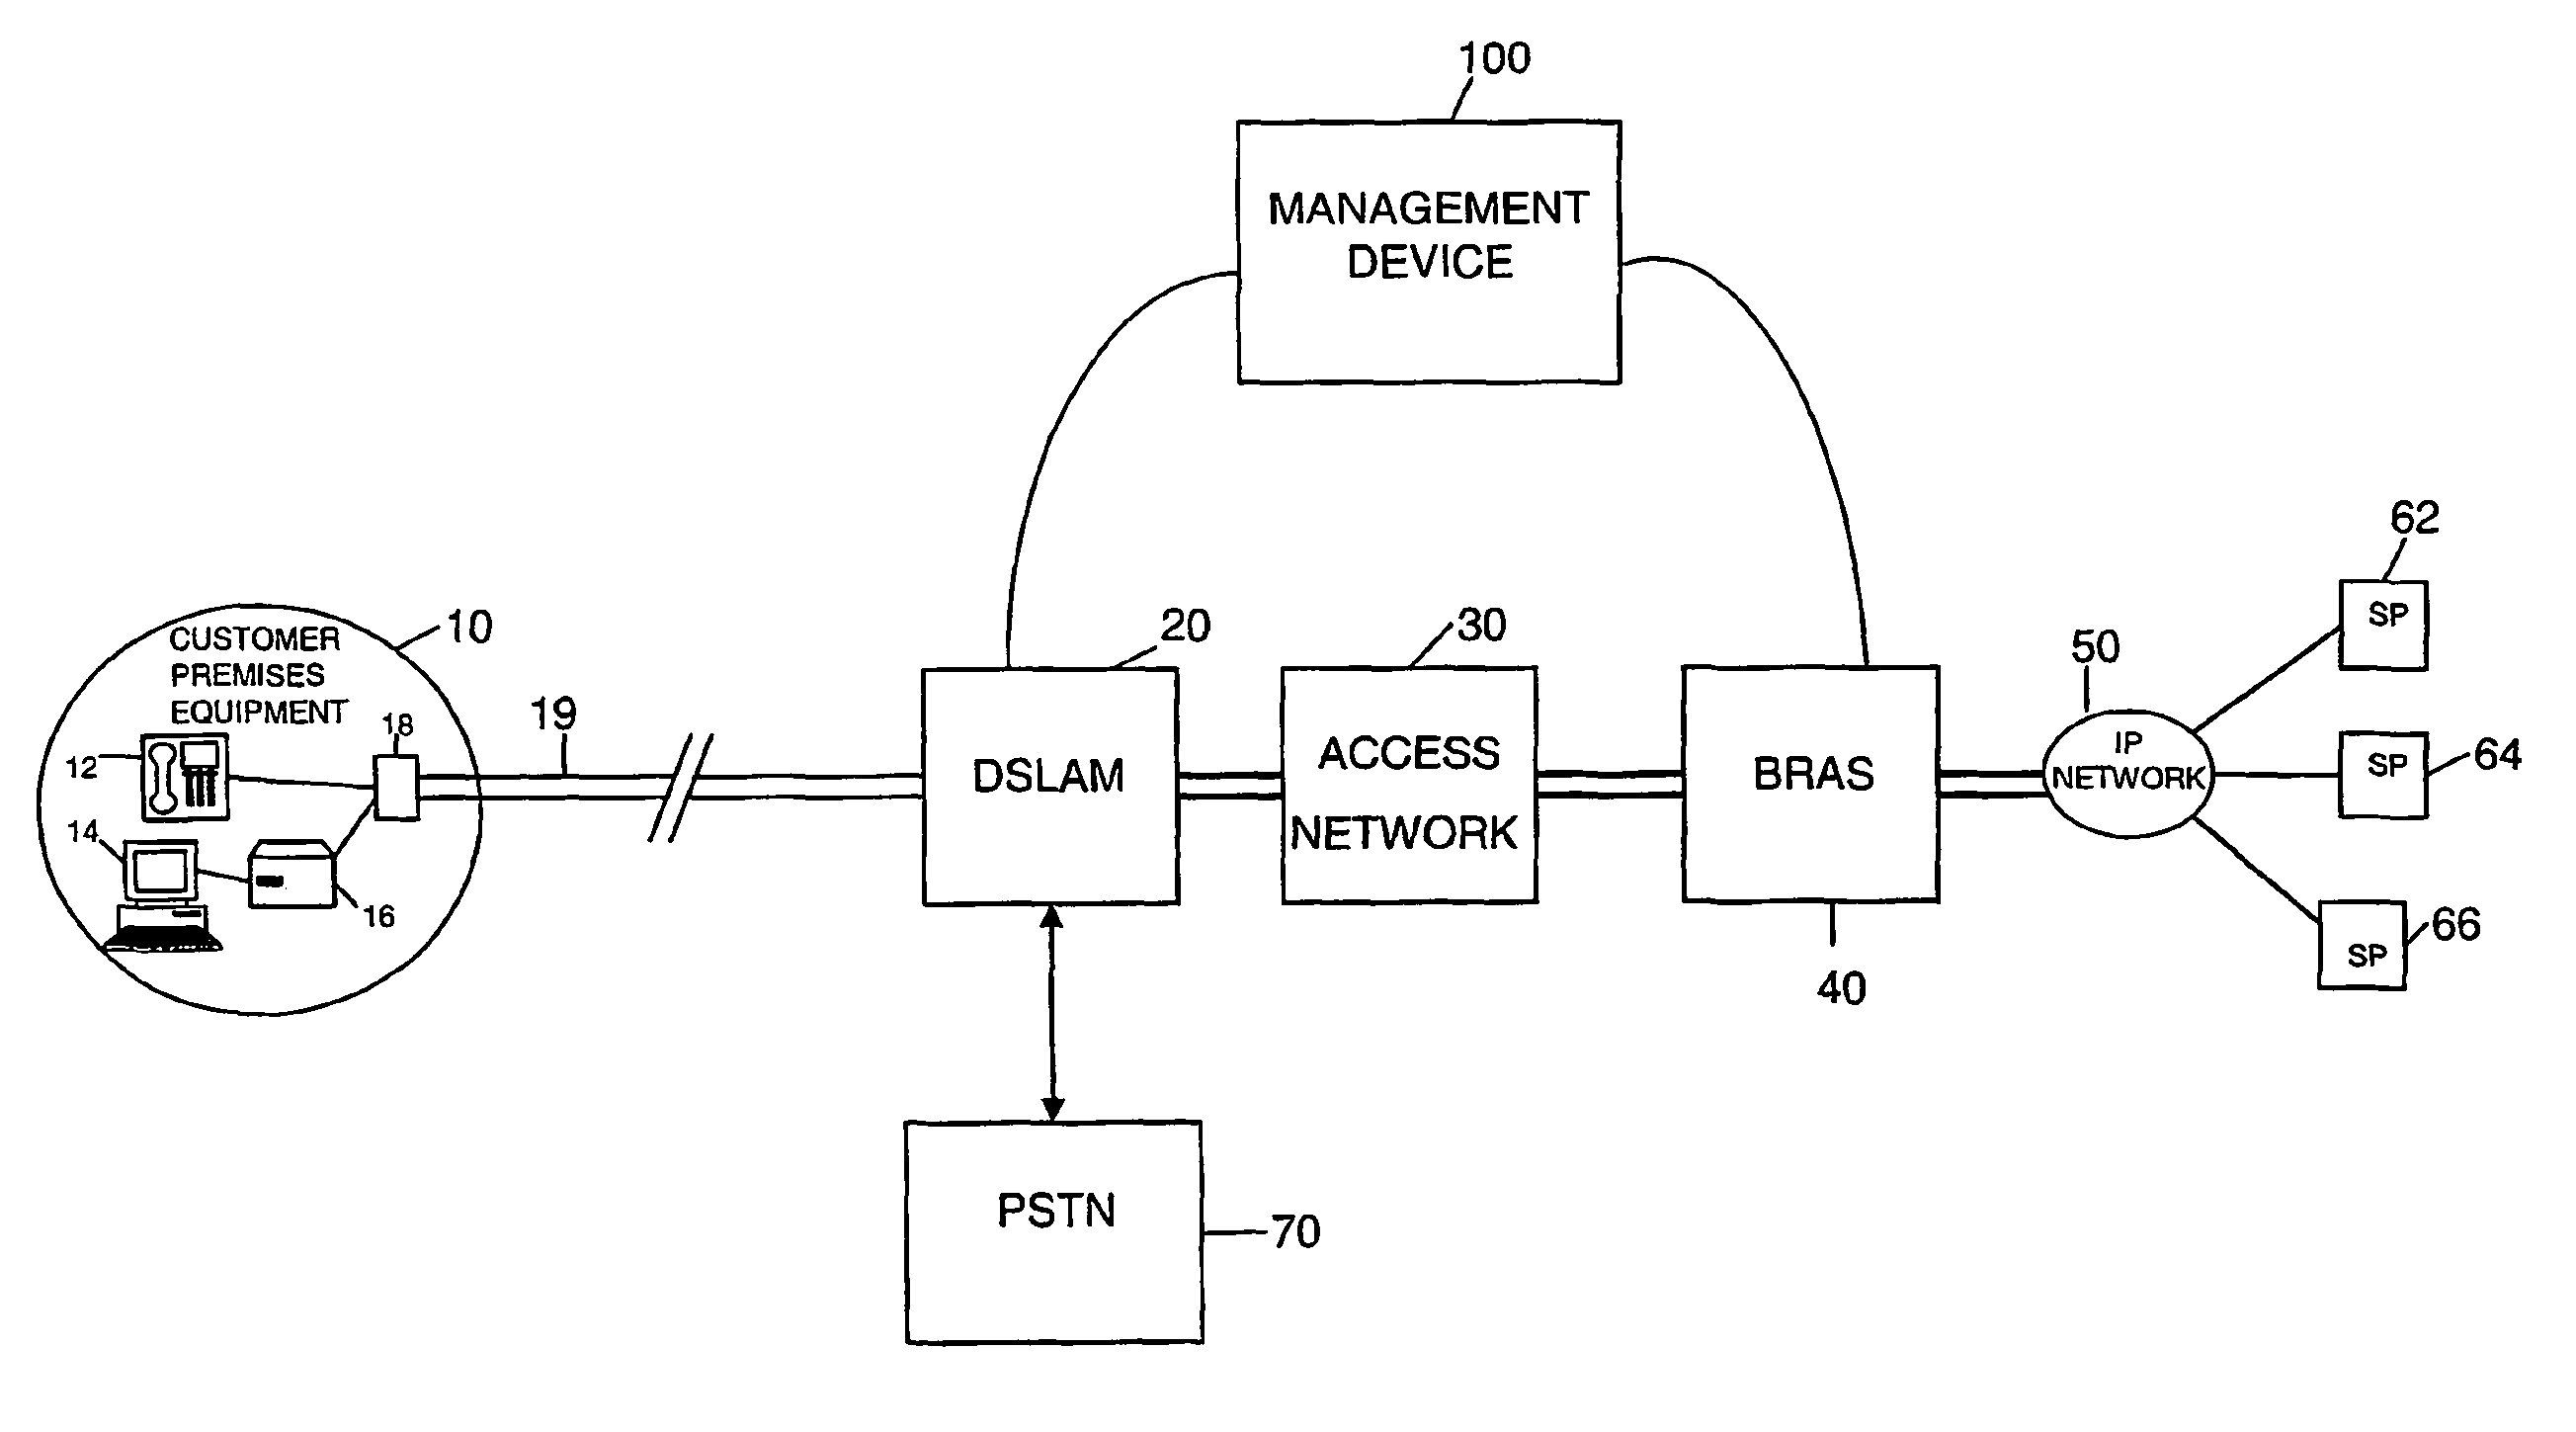 Method and apparatus for communicating data over a data network and controlling an amount of bandwidth a user can transmit or receive over a DSL connection